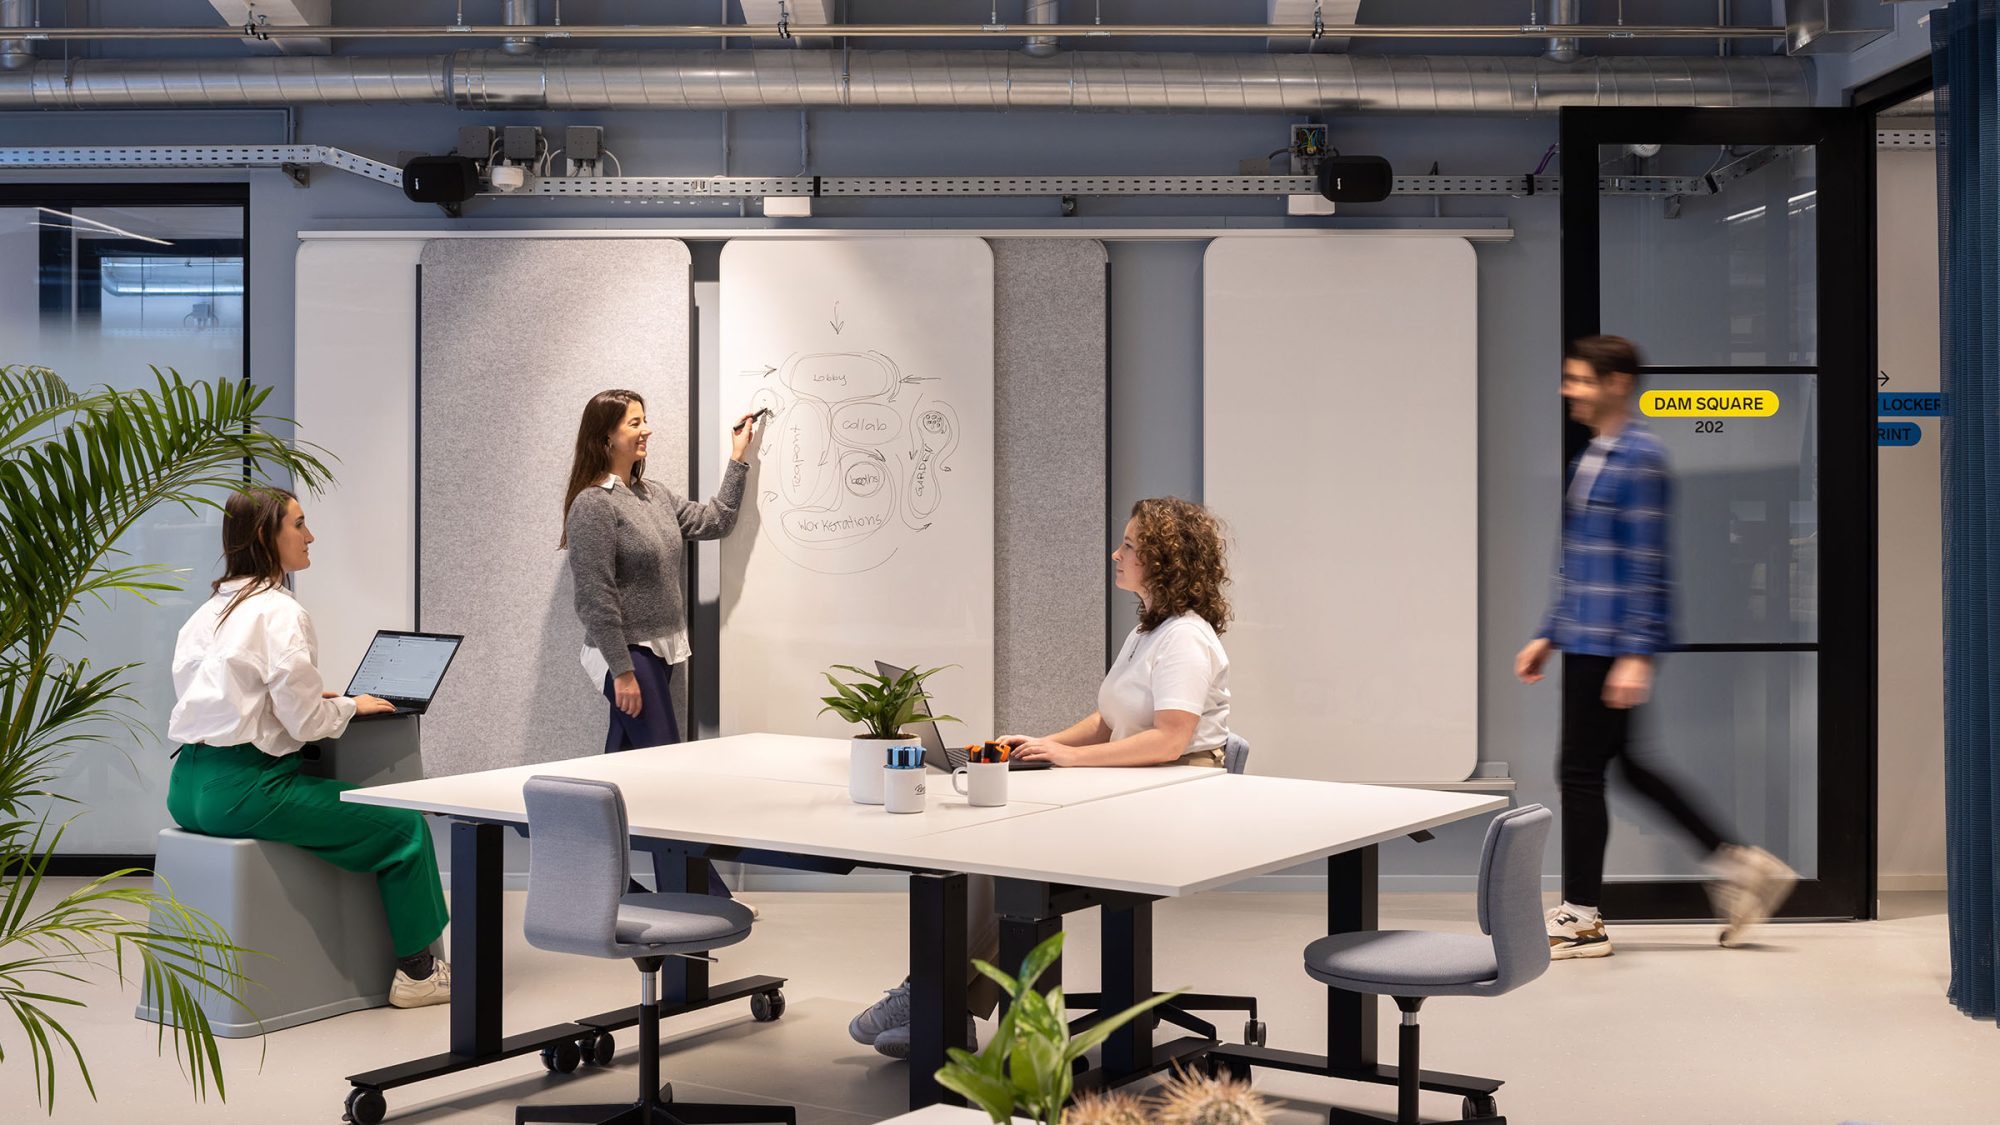 Interior design that supports the work day featuring modular whiteboards, tables and chairs.